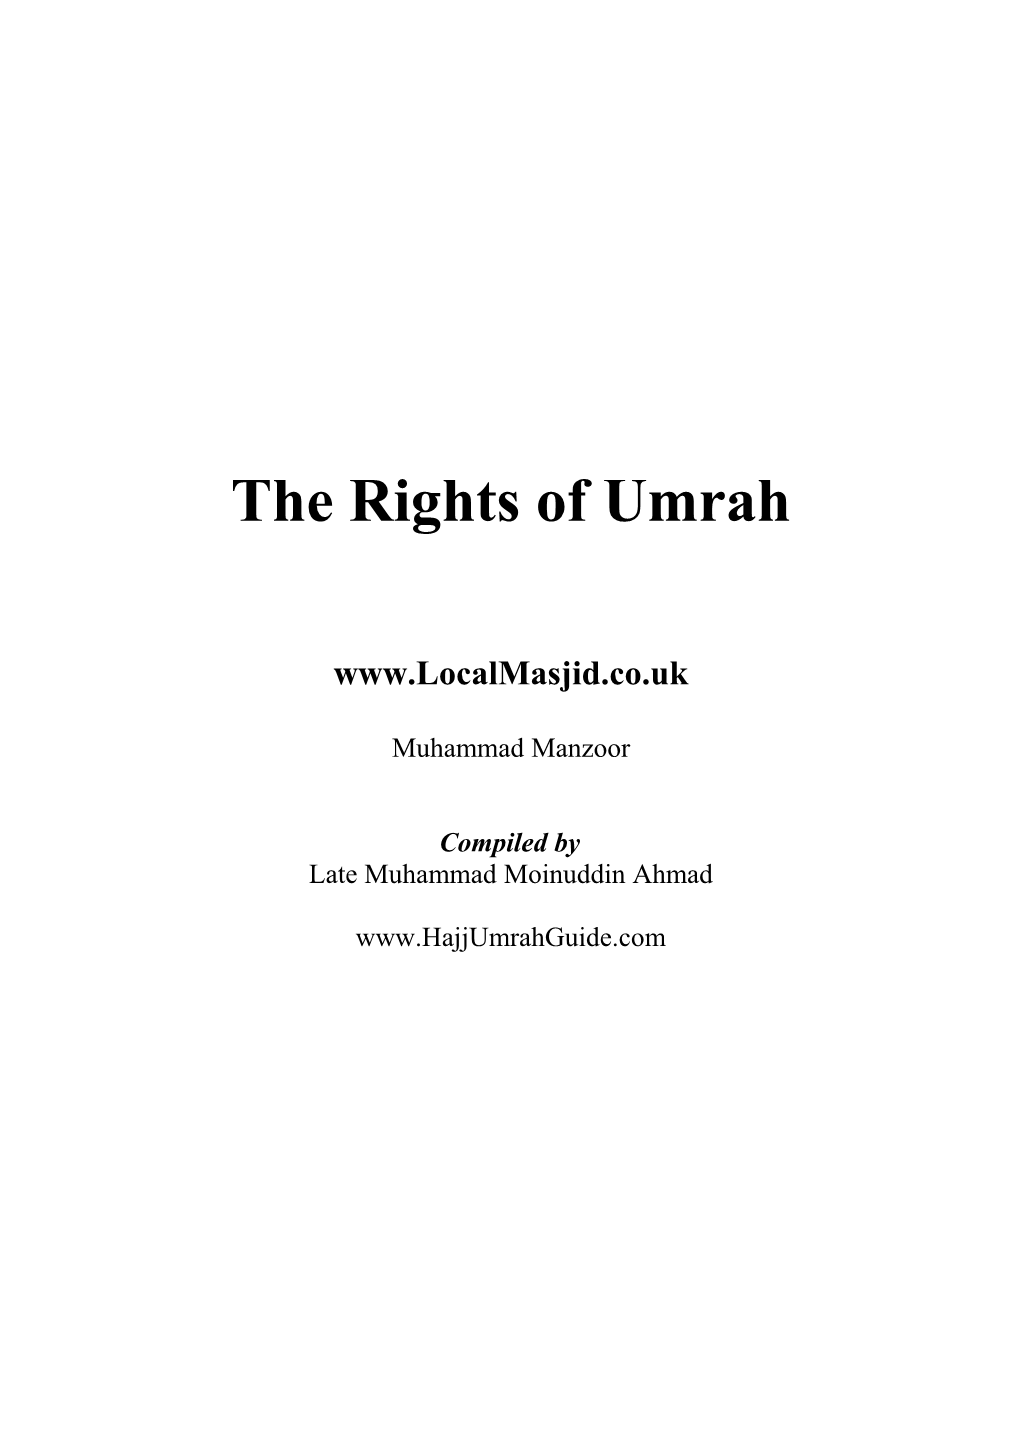 The Rights of Umrah